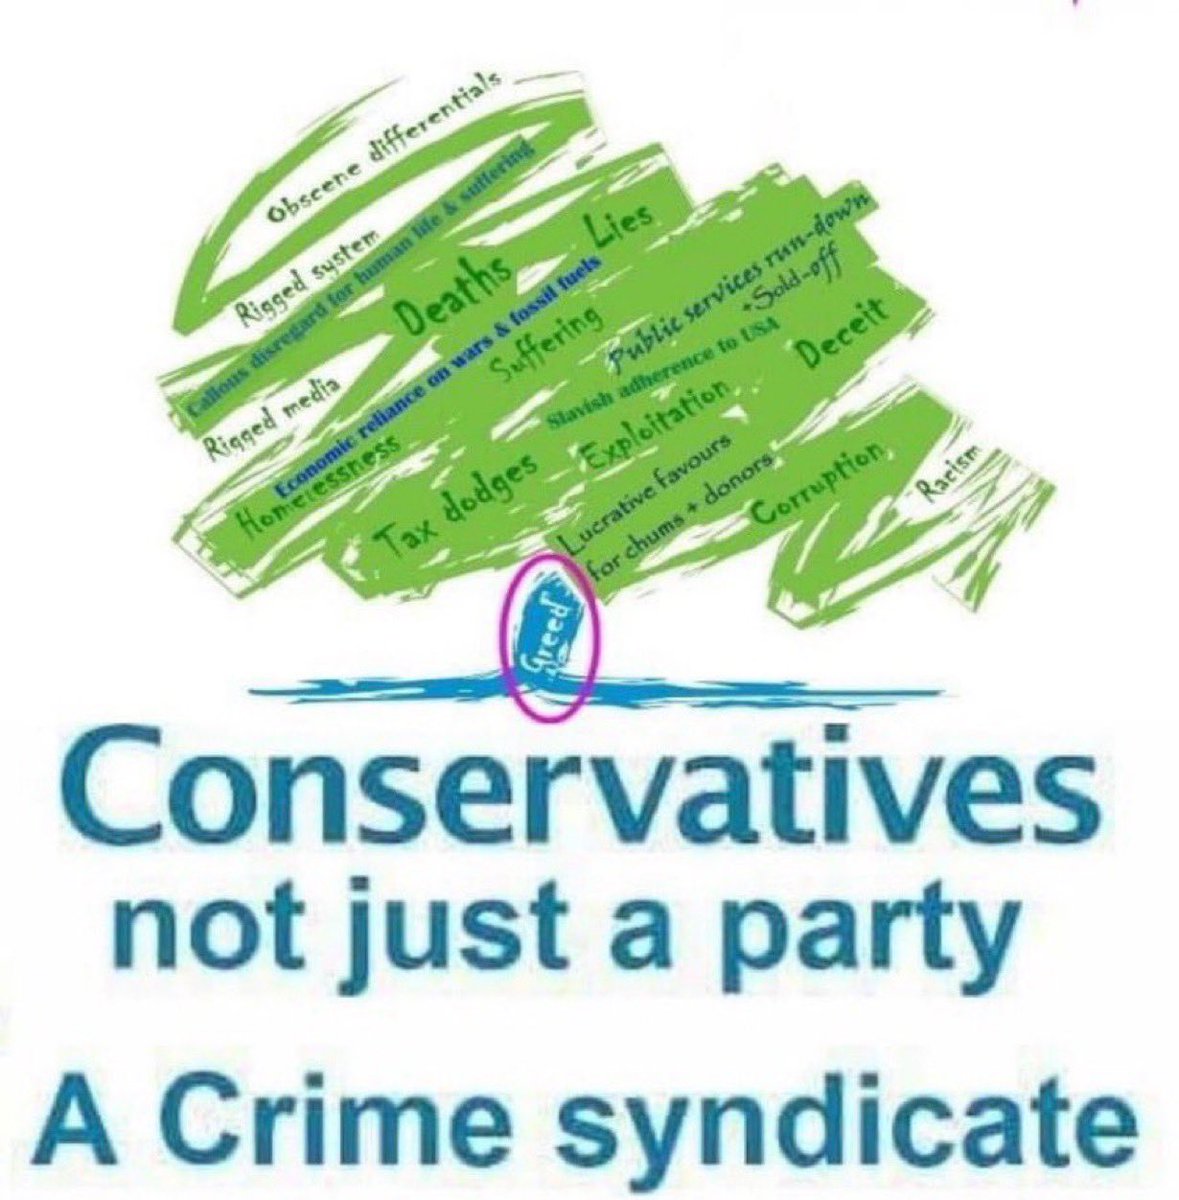 The most corrupt government ever what an absolute joke the uk is Tory scum have fucked it beyond repair while they rob us blind we have to strike to put food on the table #JohnsonTheLiar #bbc #ZahawiOut #SunakOut90 #ToryCorruption #TorySleaze #ToryCriminalsUnfitToGovern #